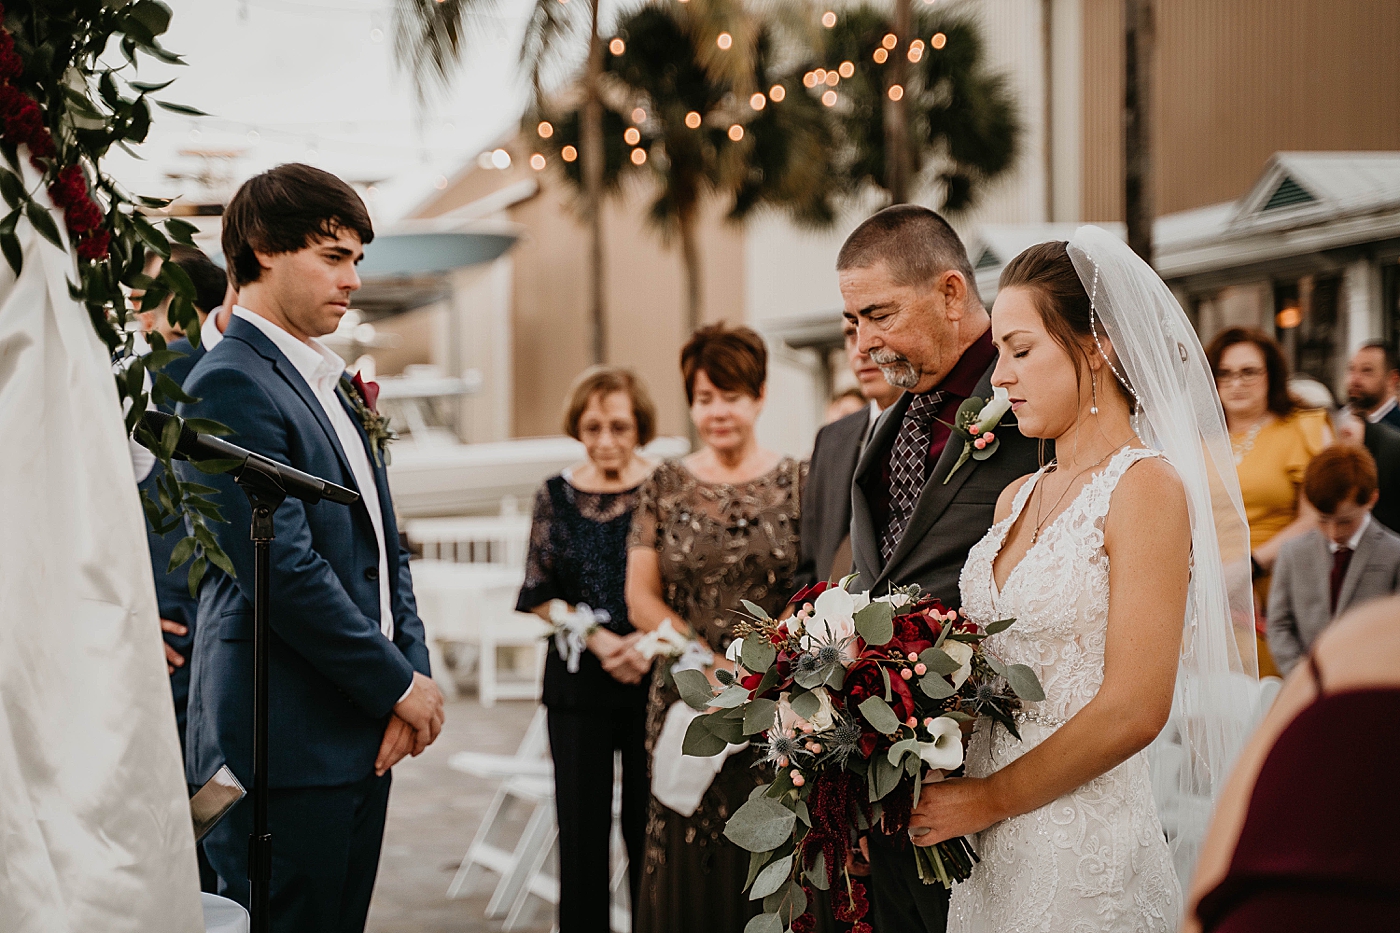 Groom looking at Bride during prayer Ceremony Out of the Blue Celebrations Wedding Photography captured by South Florida Wedding Photographer Krystal Capone Photography 